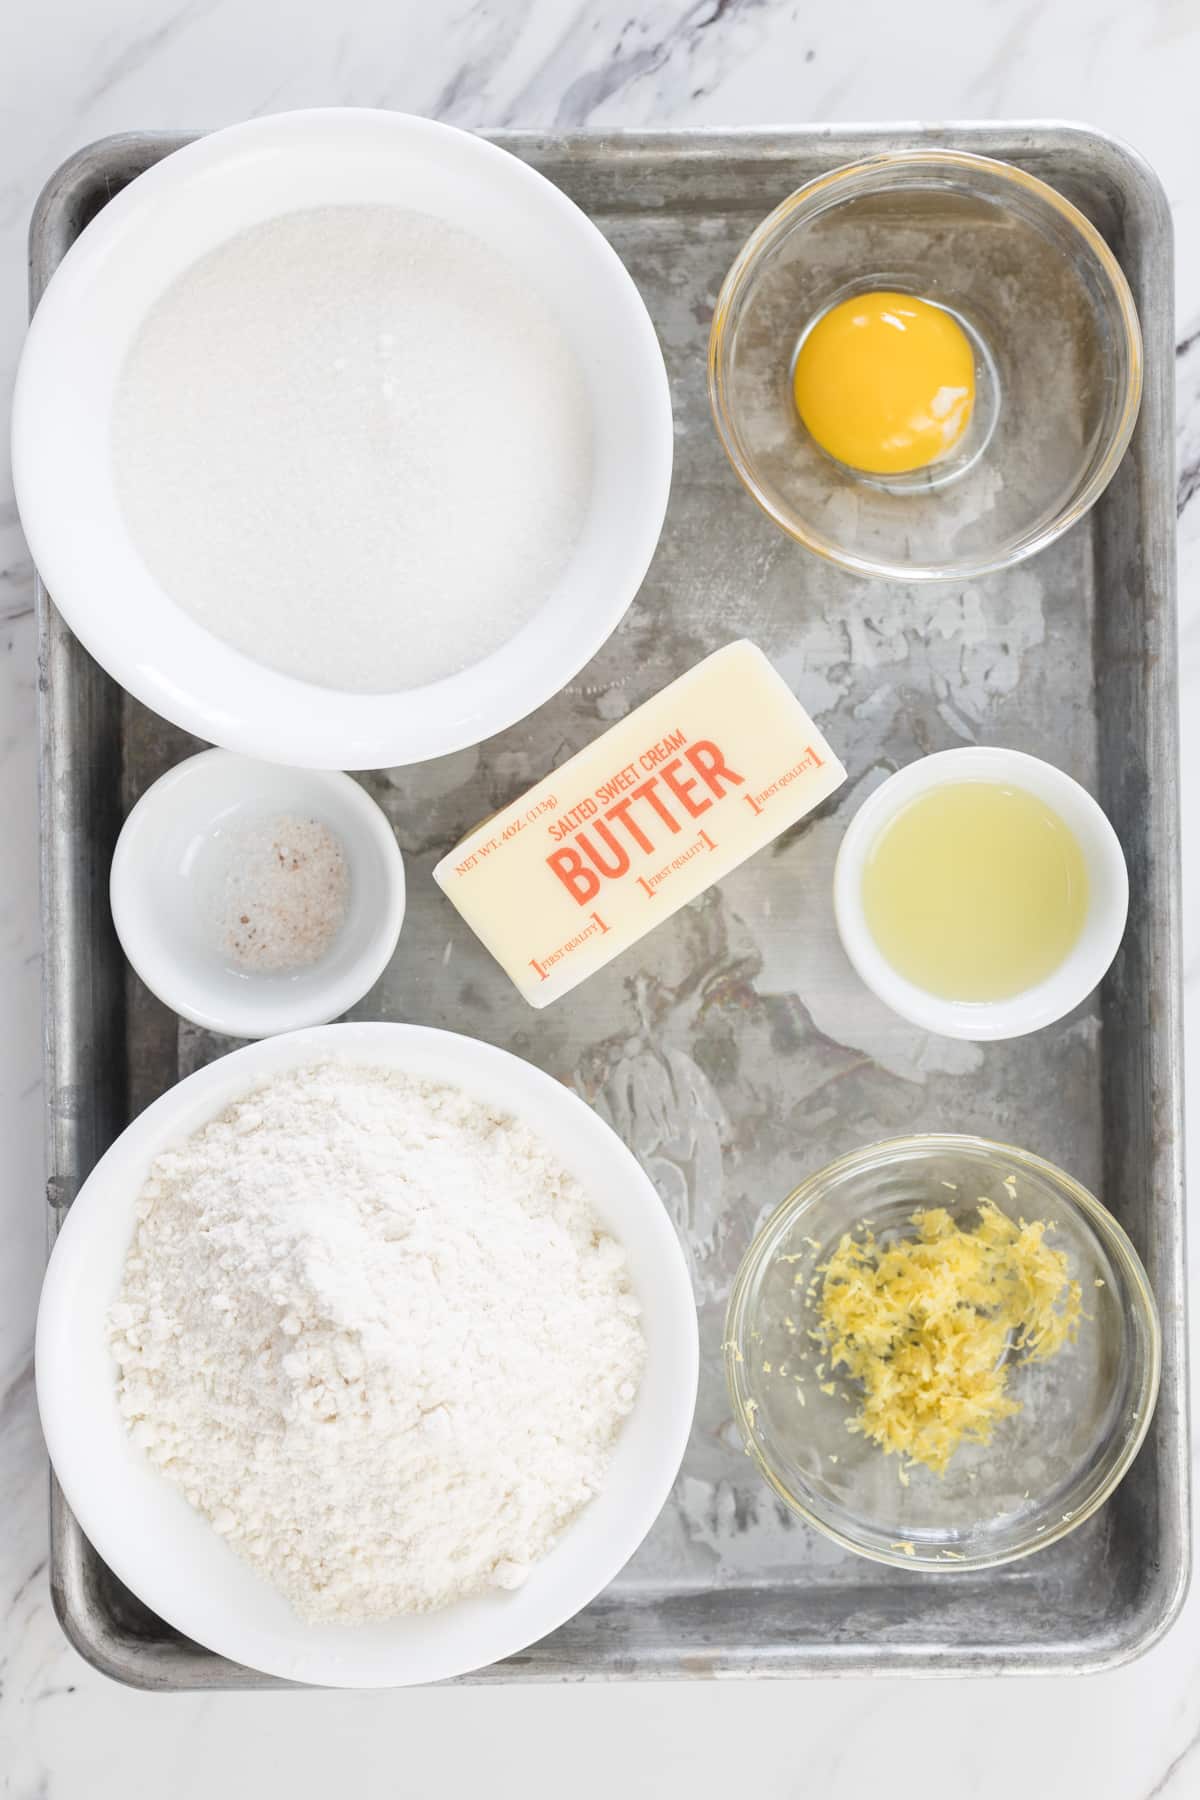 Top view of ingredients needed to make lemon shortbread cookies in small bowls on a tray.